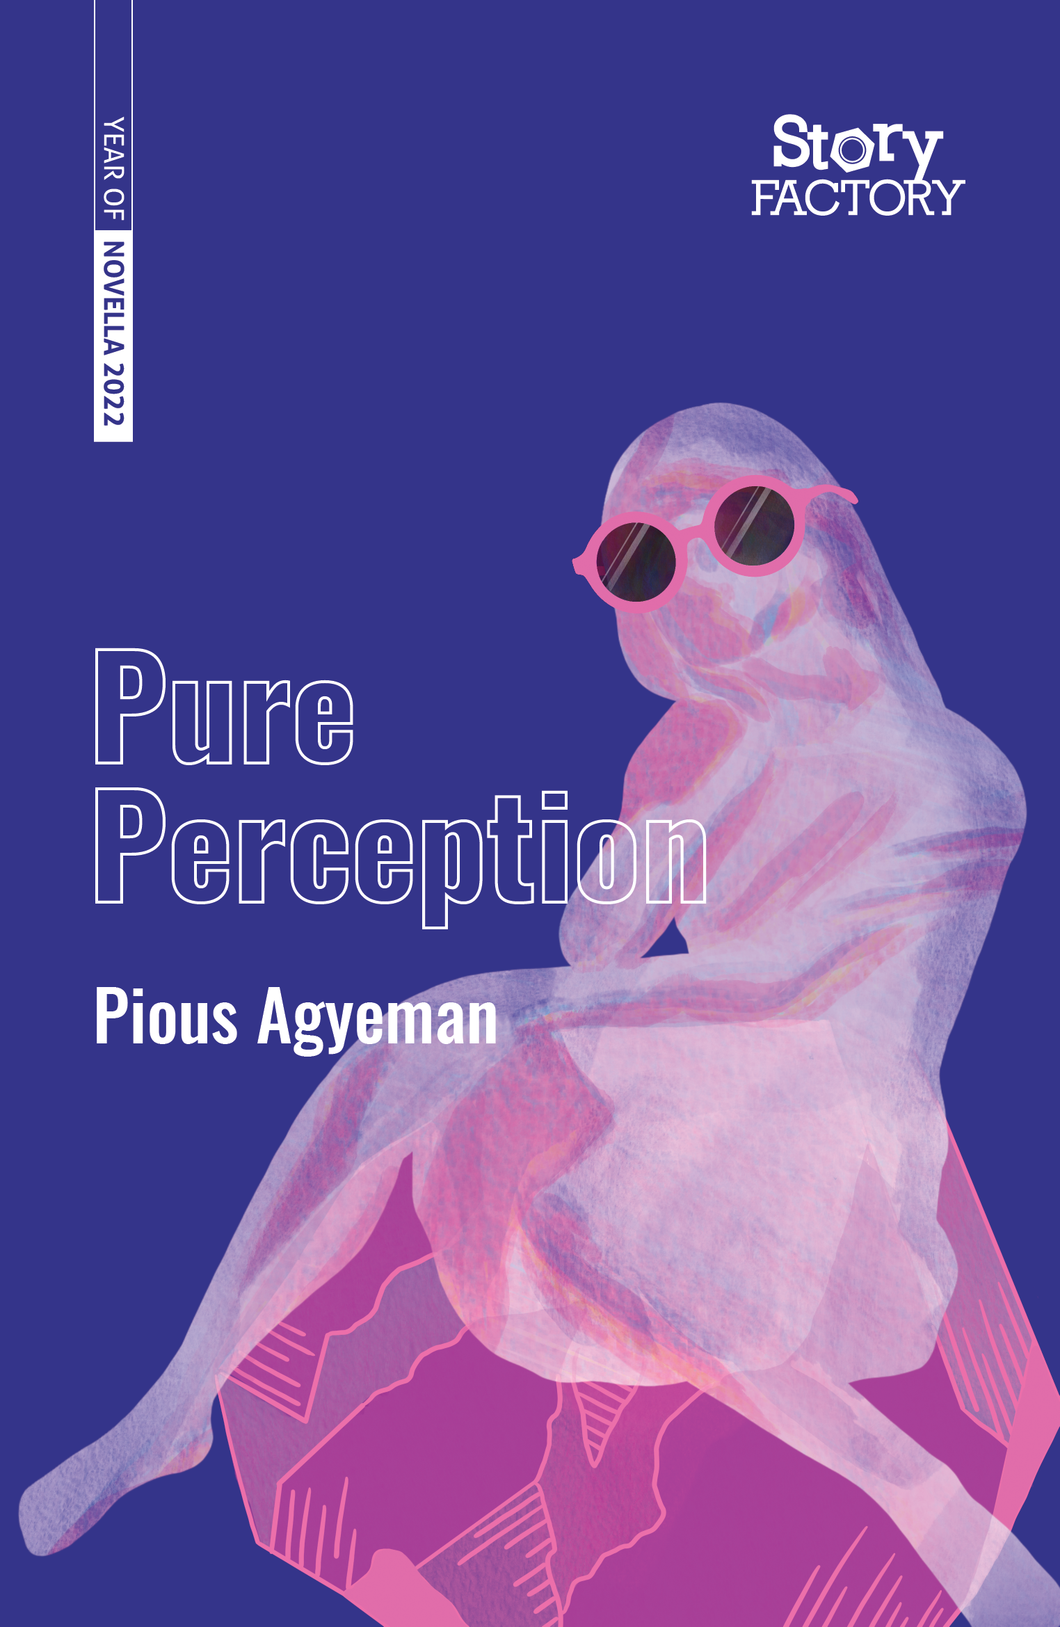 Pure Perception by Pious Agyeman